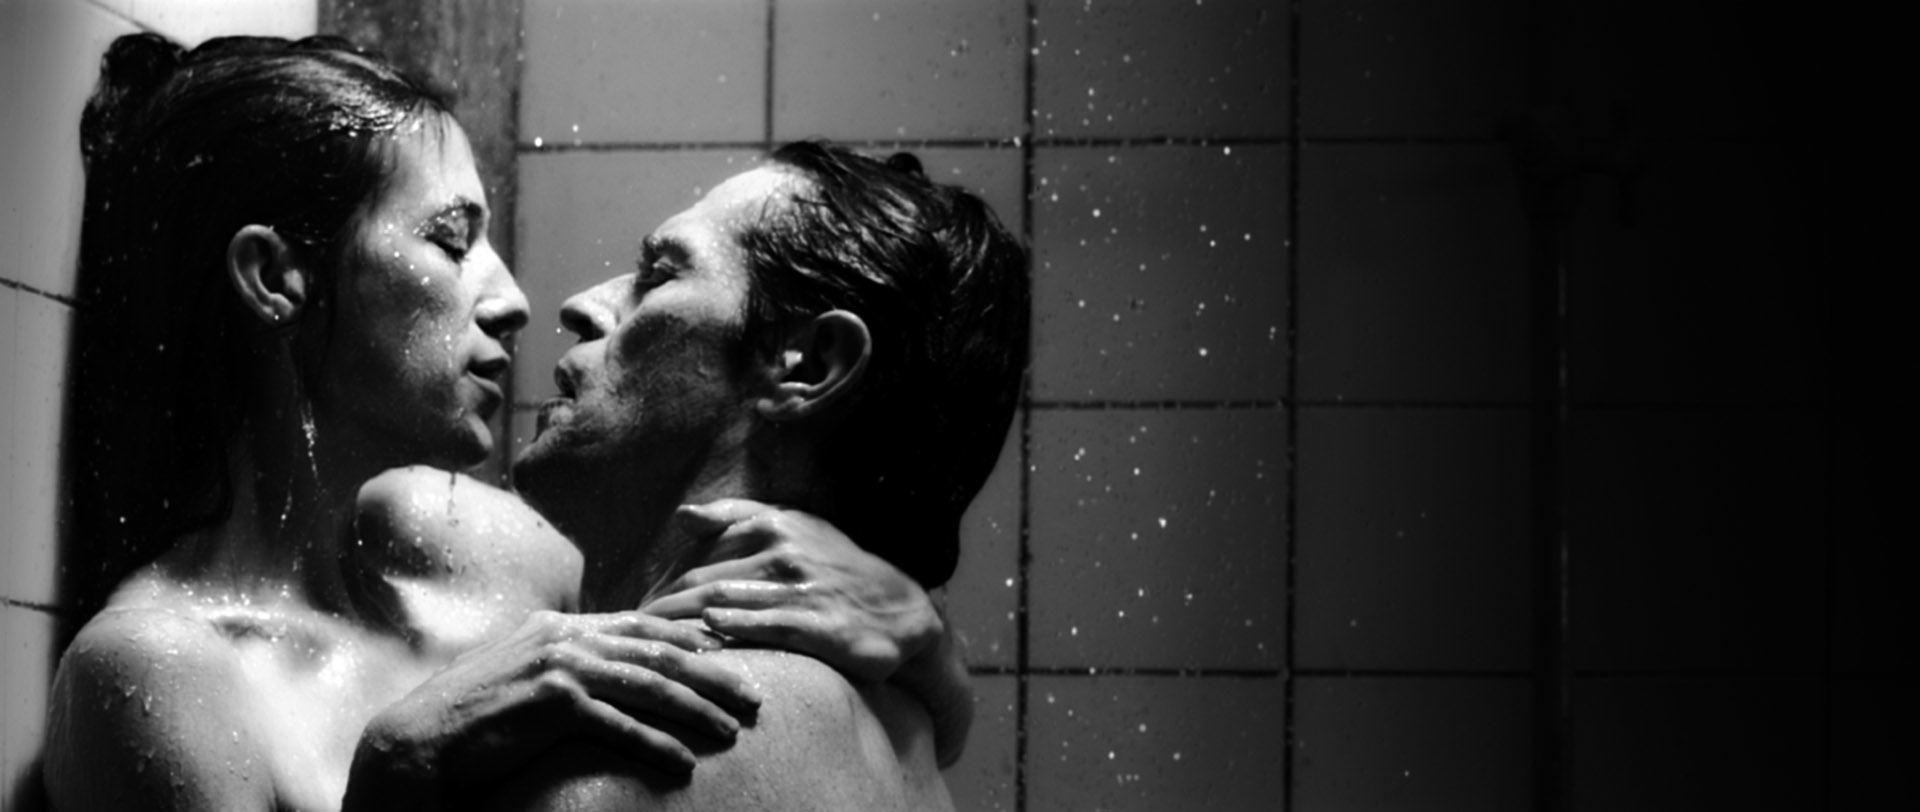 Two people embracing in a shower, facing each other intimately